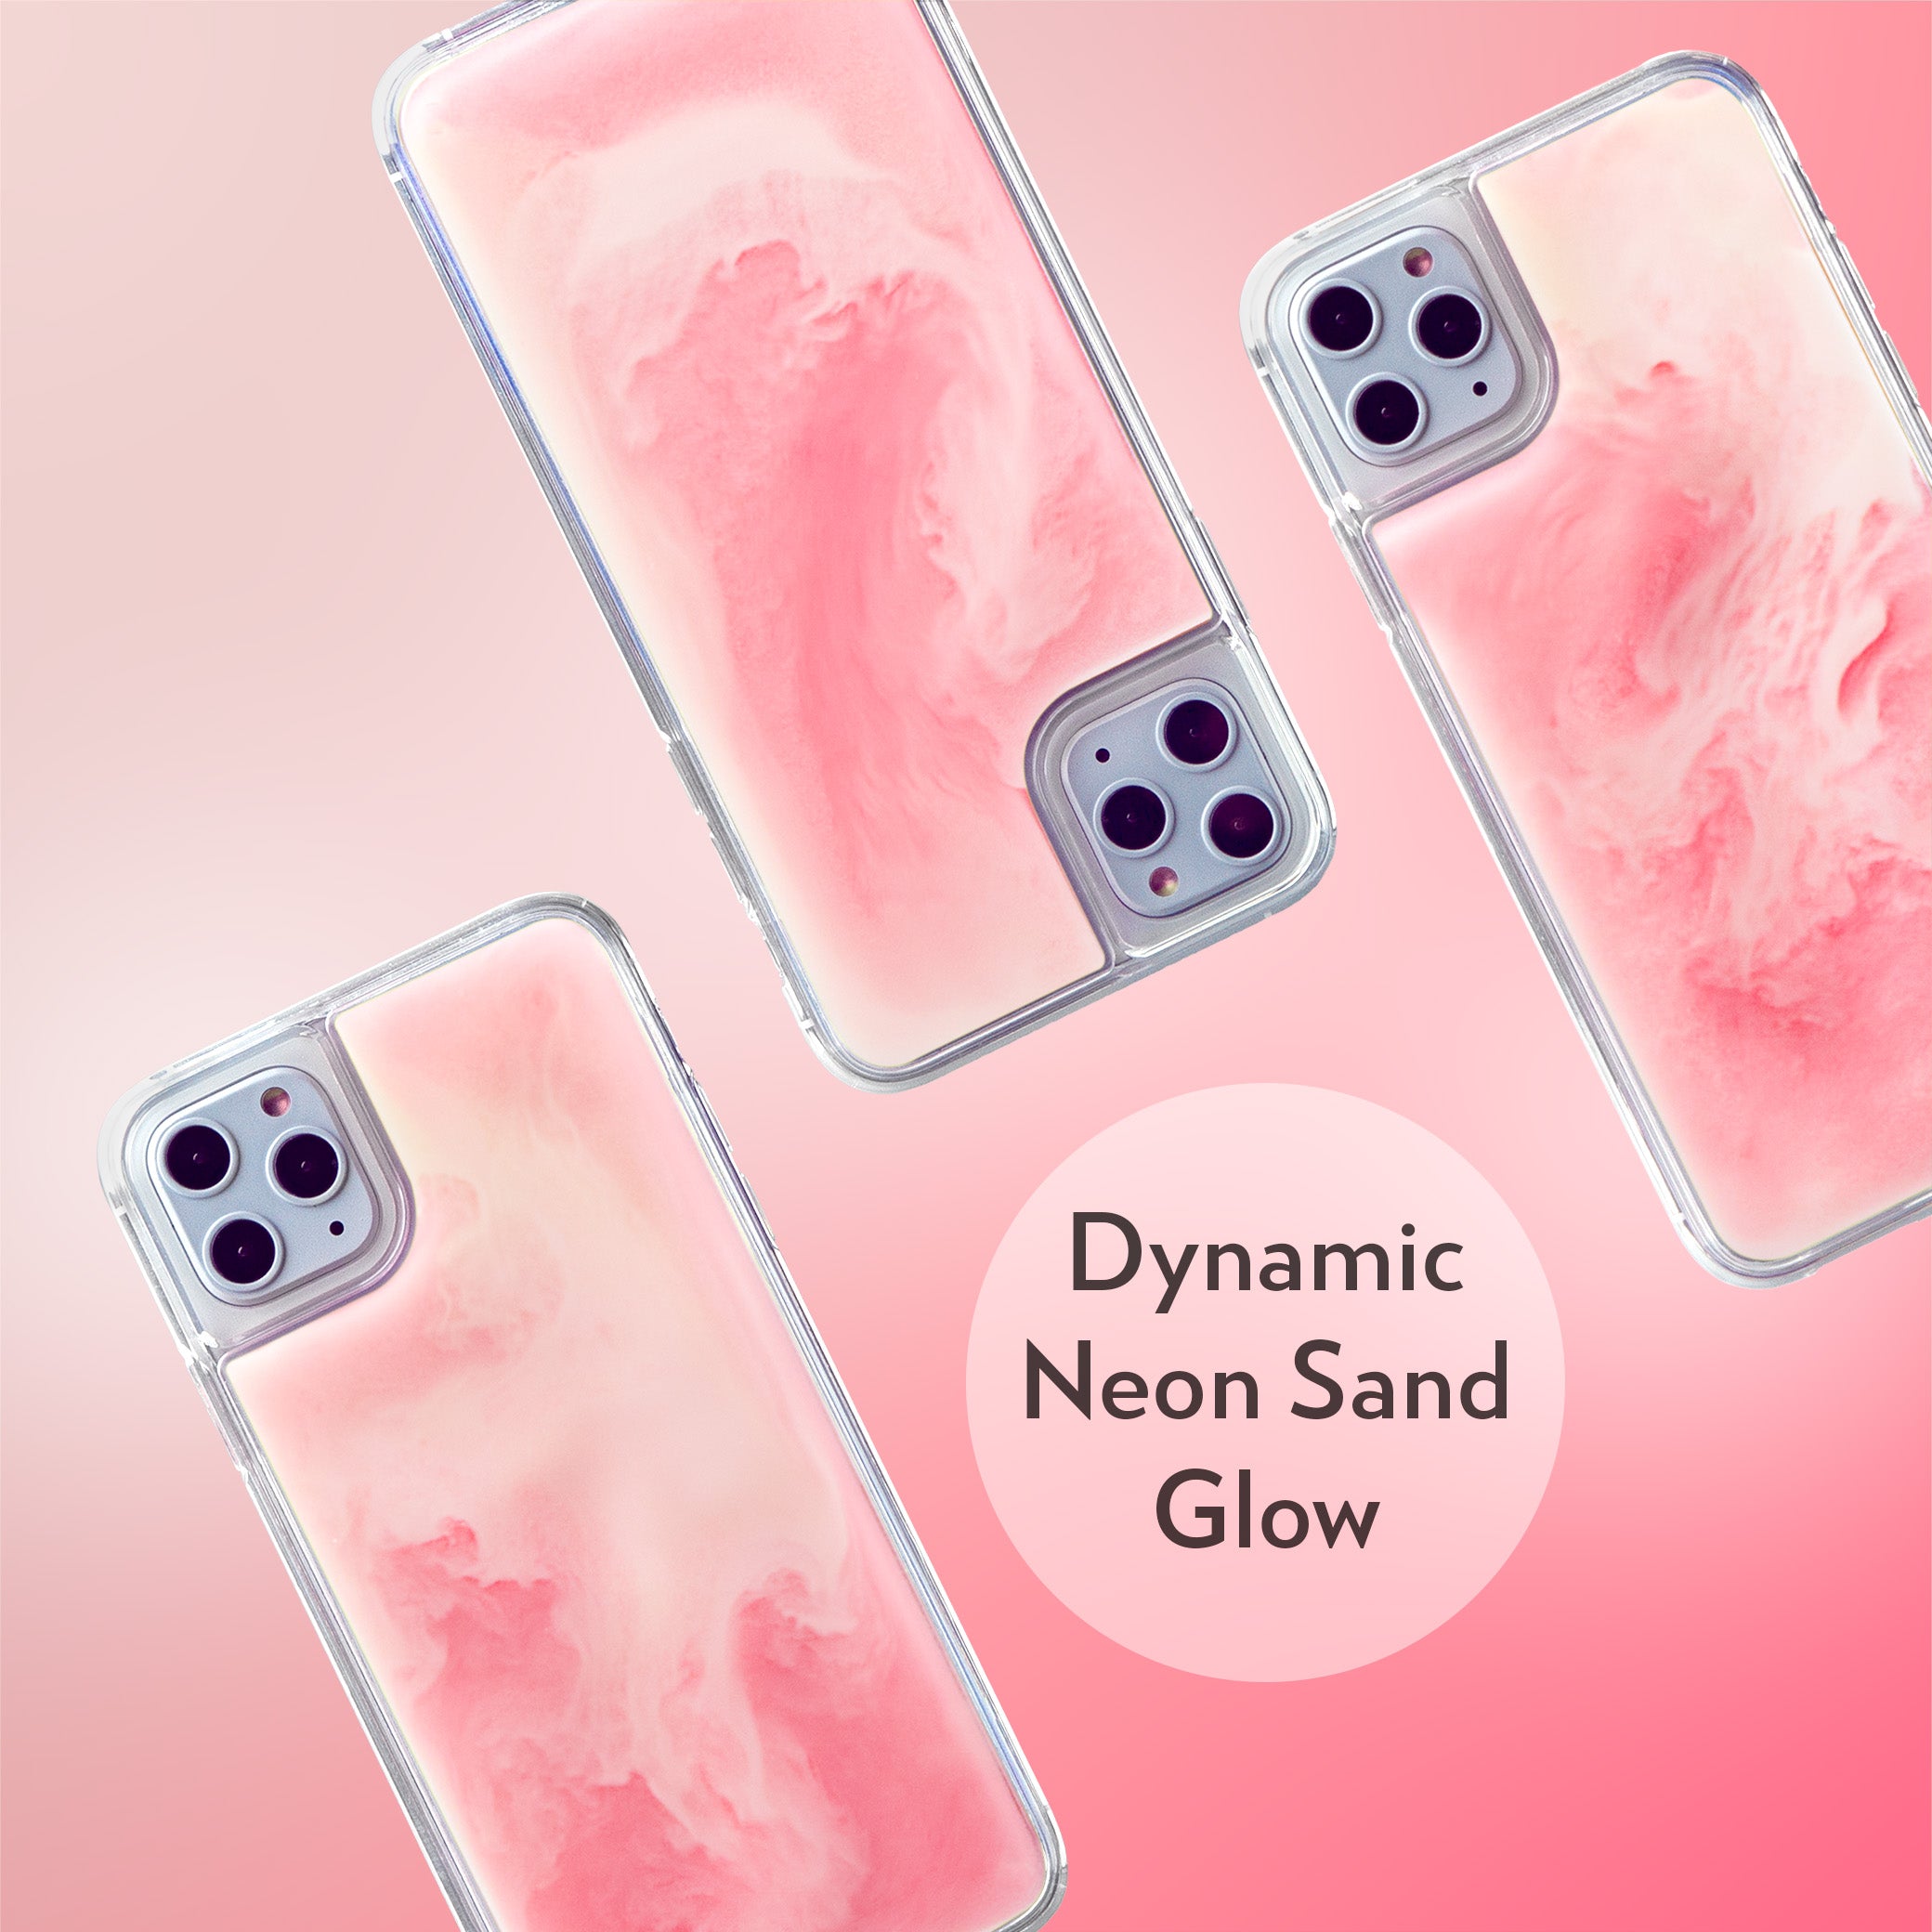 Neon Sand Case for iPhone 11 Pro Max - Pink Peach n Sand